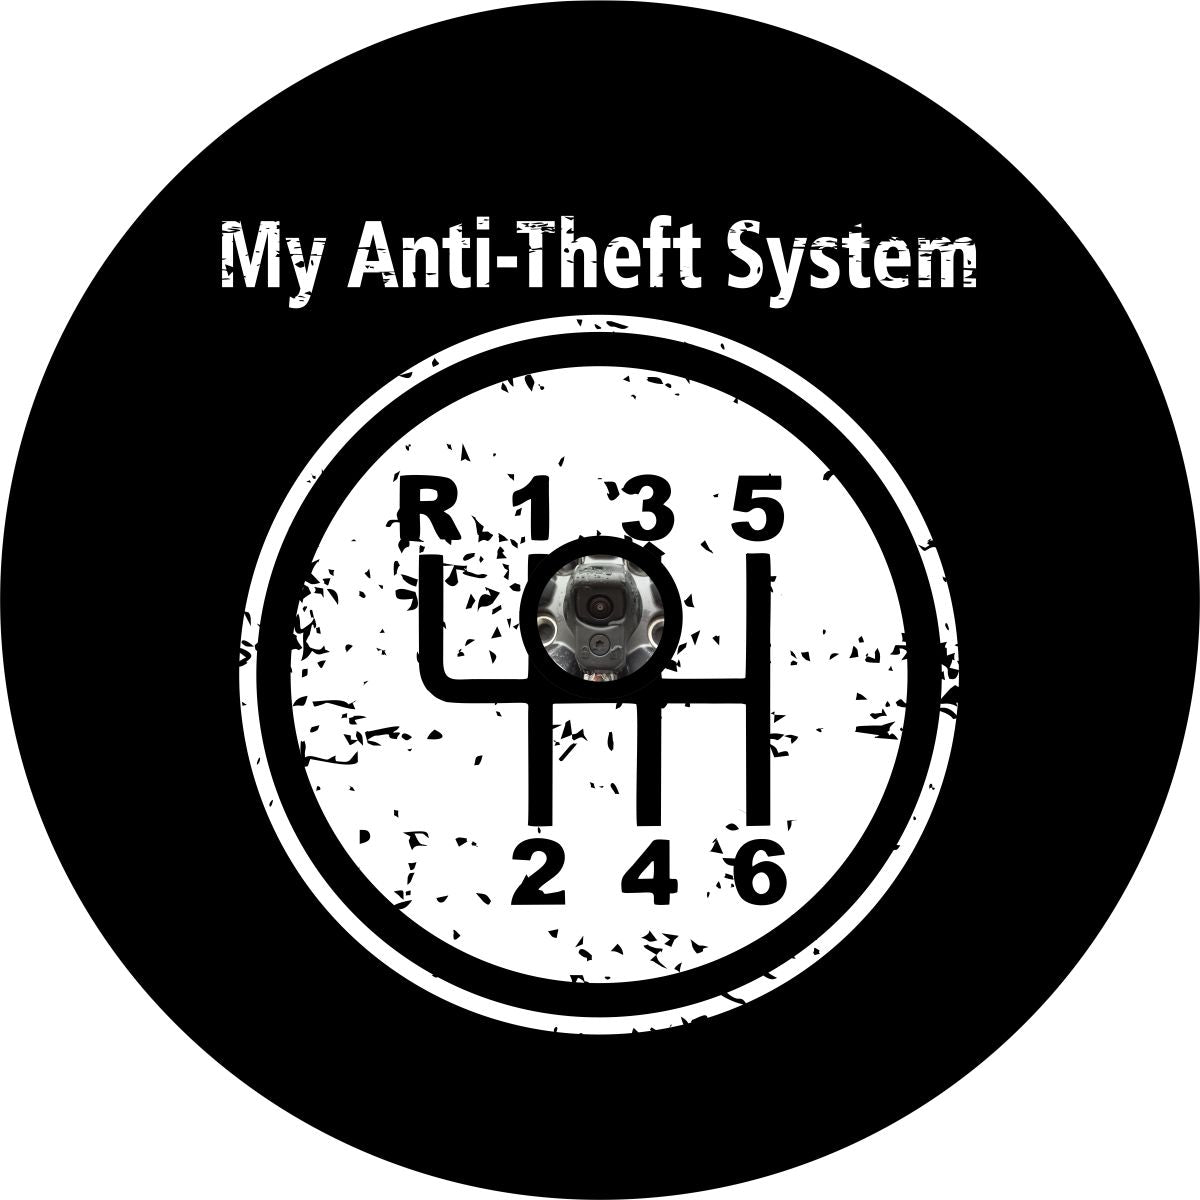 My anti-theft system and a diagram of a stick shift manual transmission spare tire cover design with a hole for a backup camera